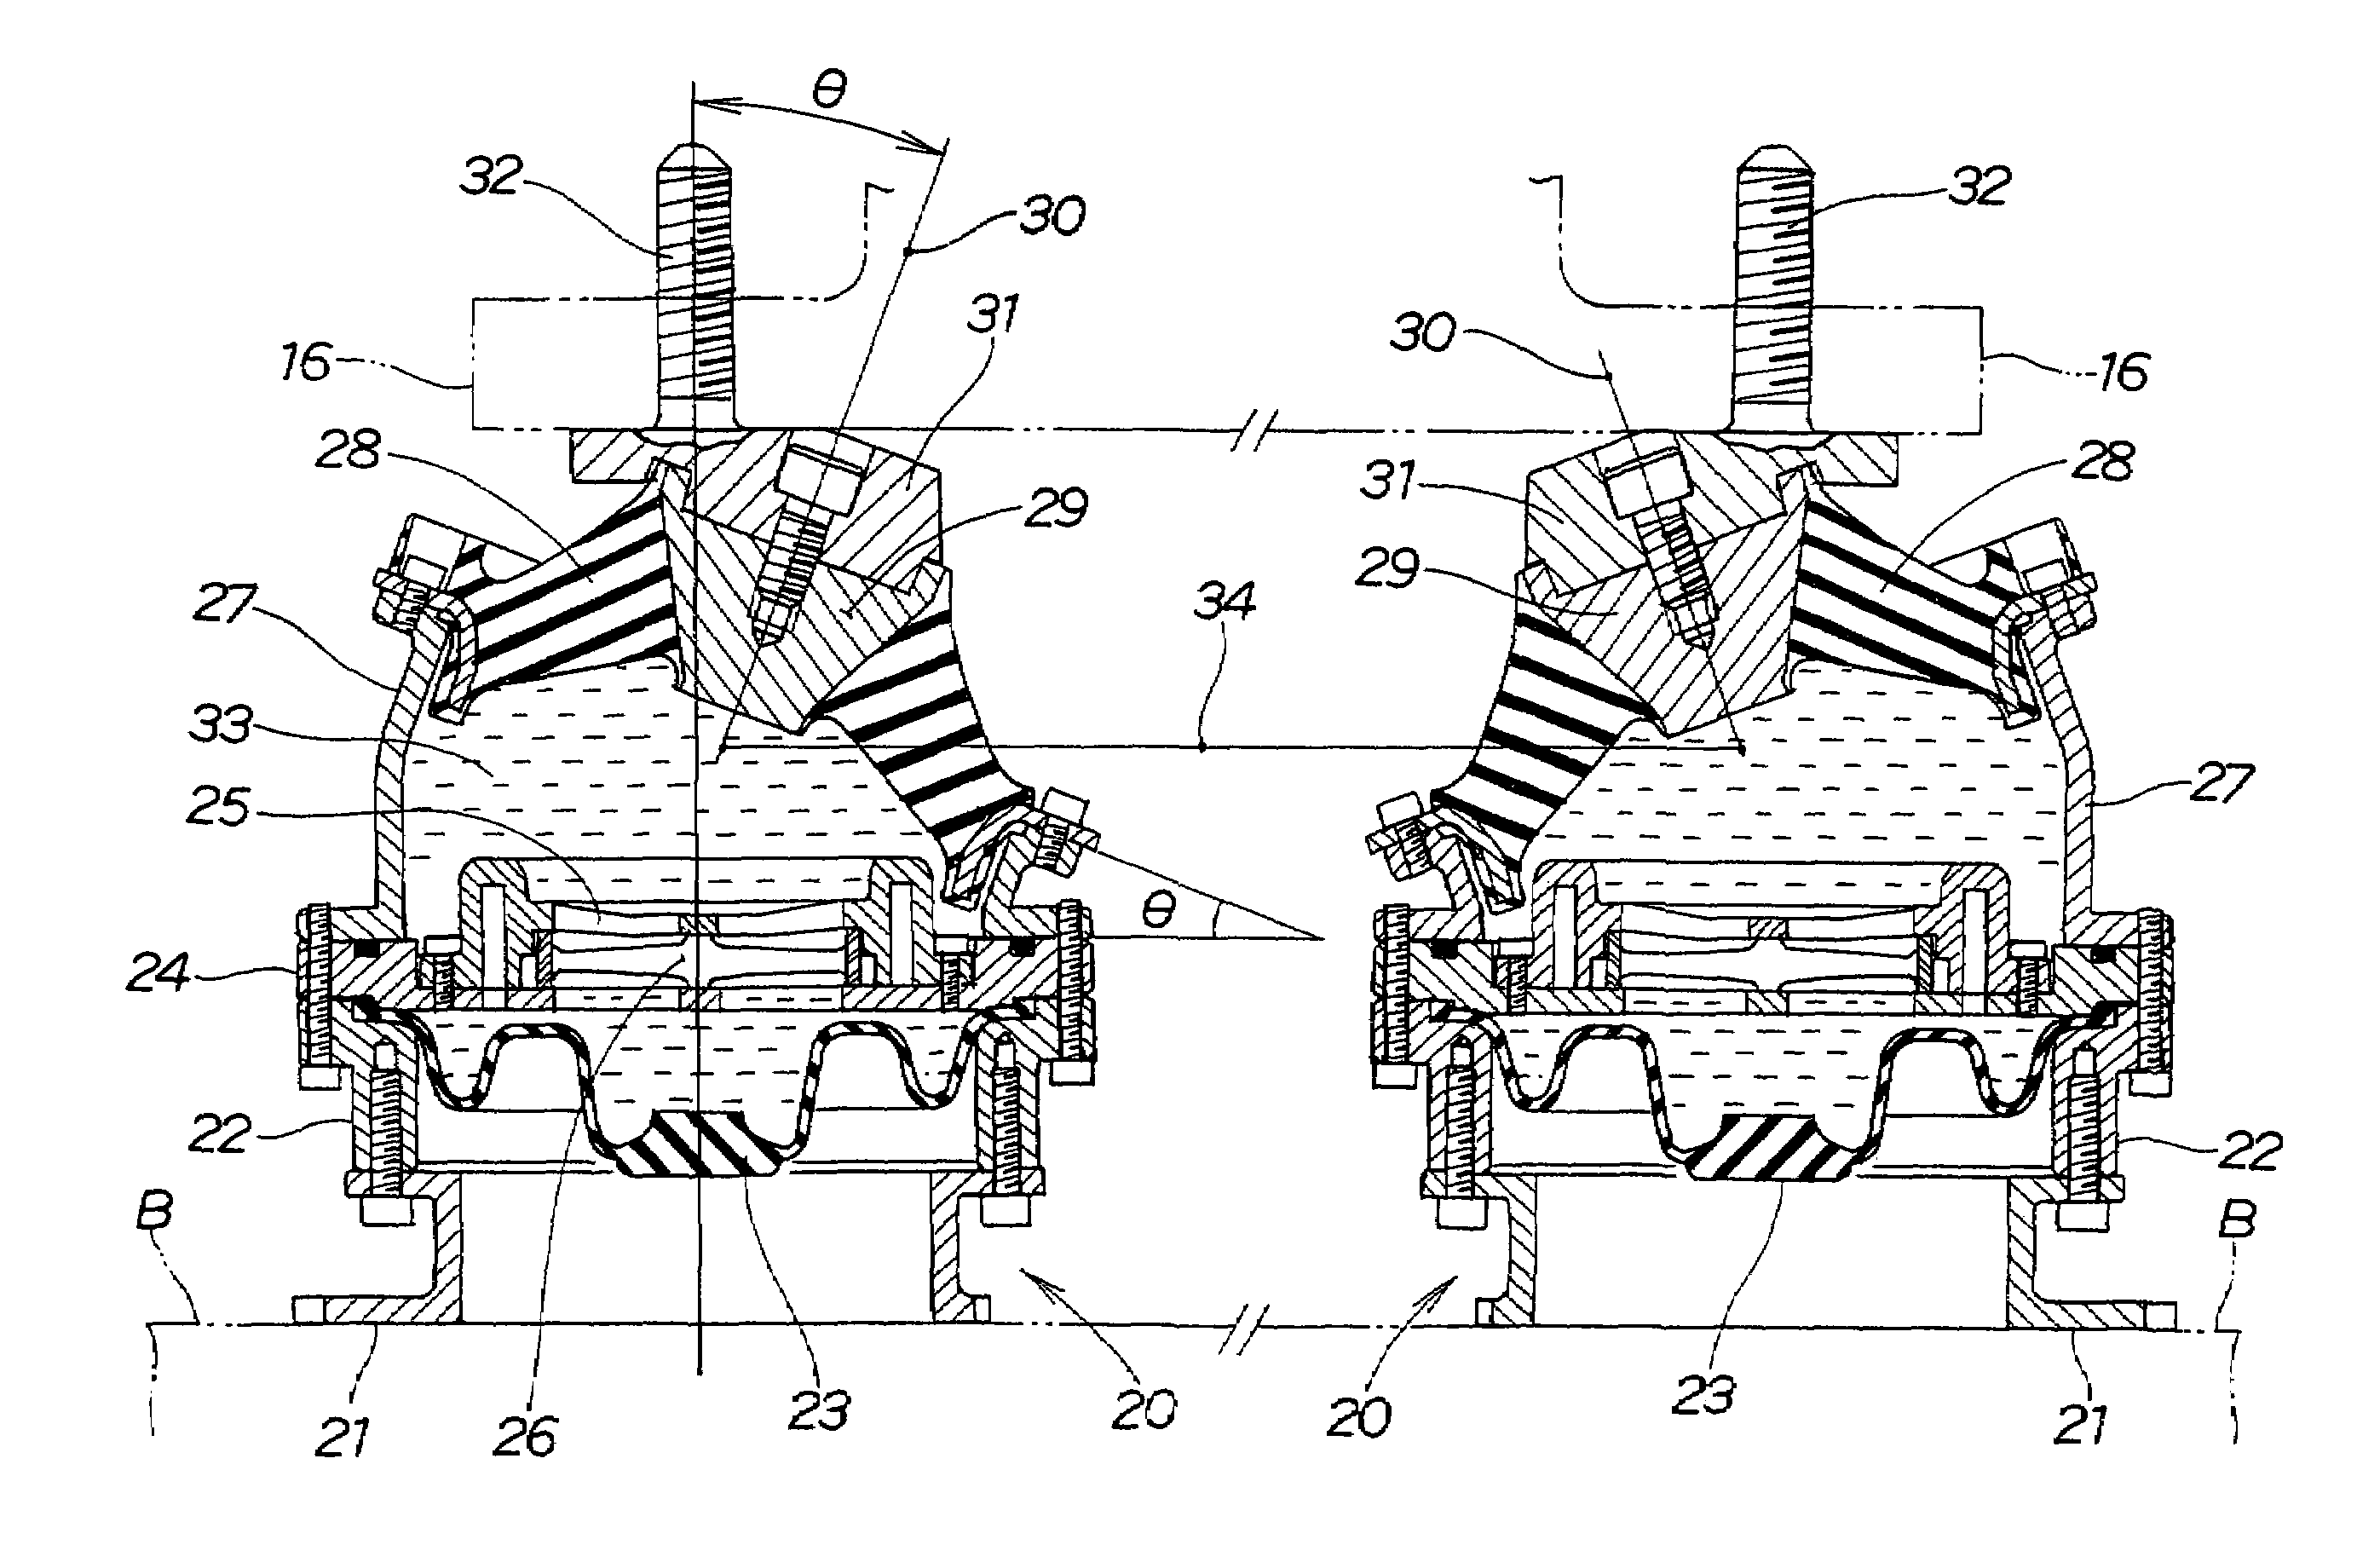 Support structure for transversal engine